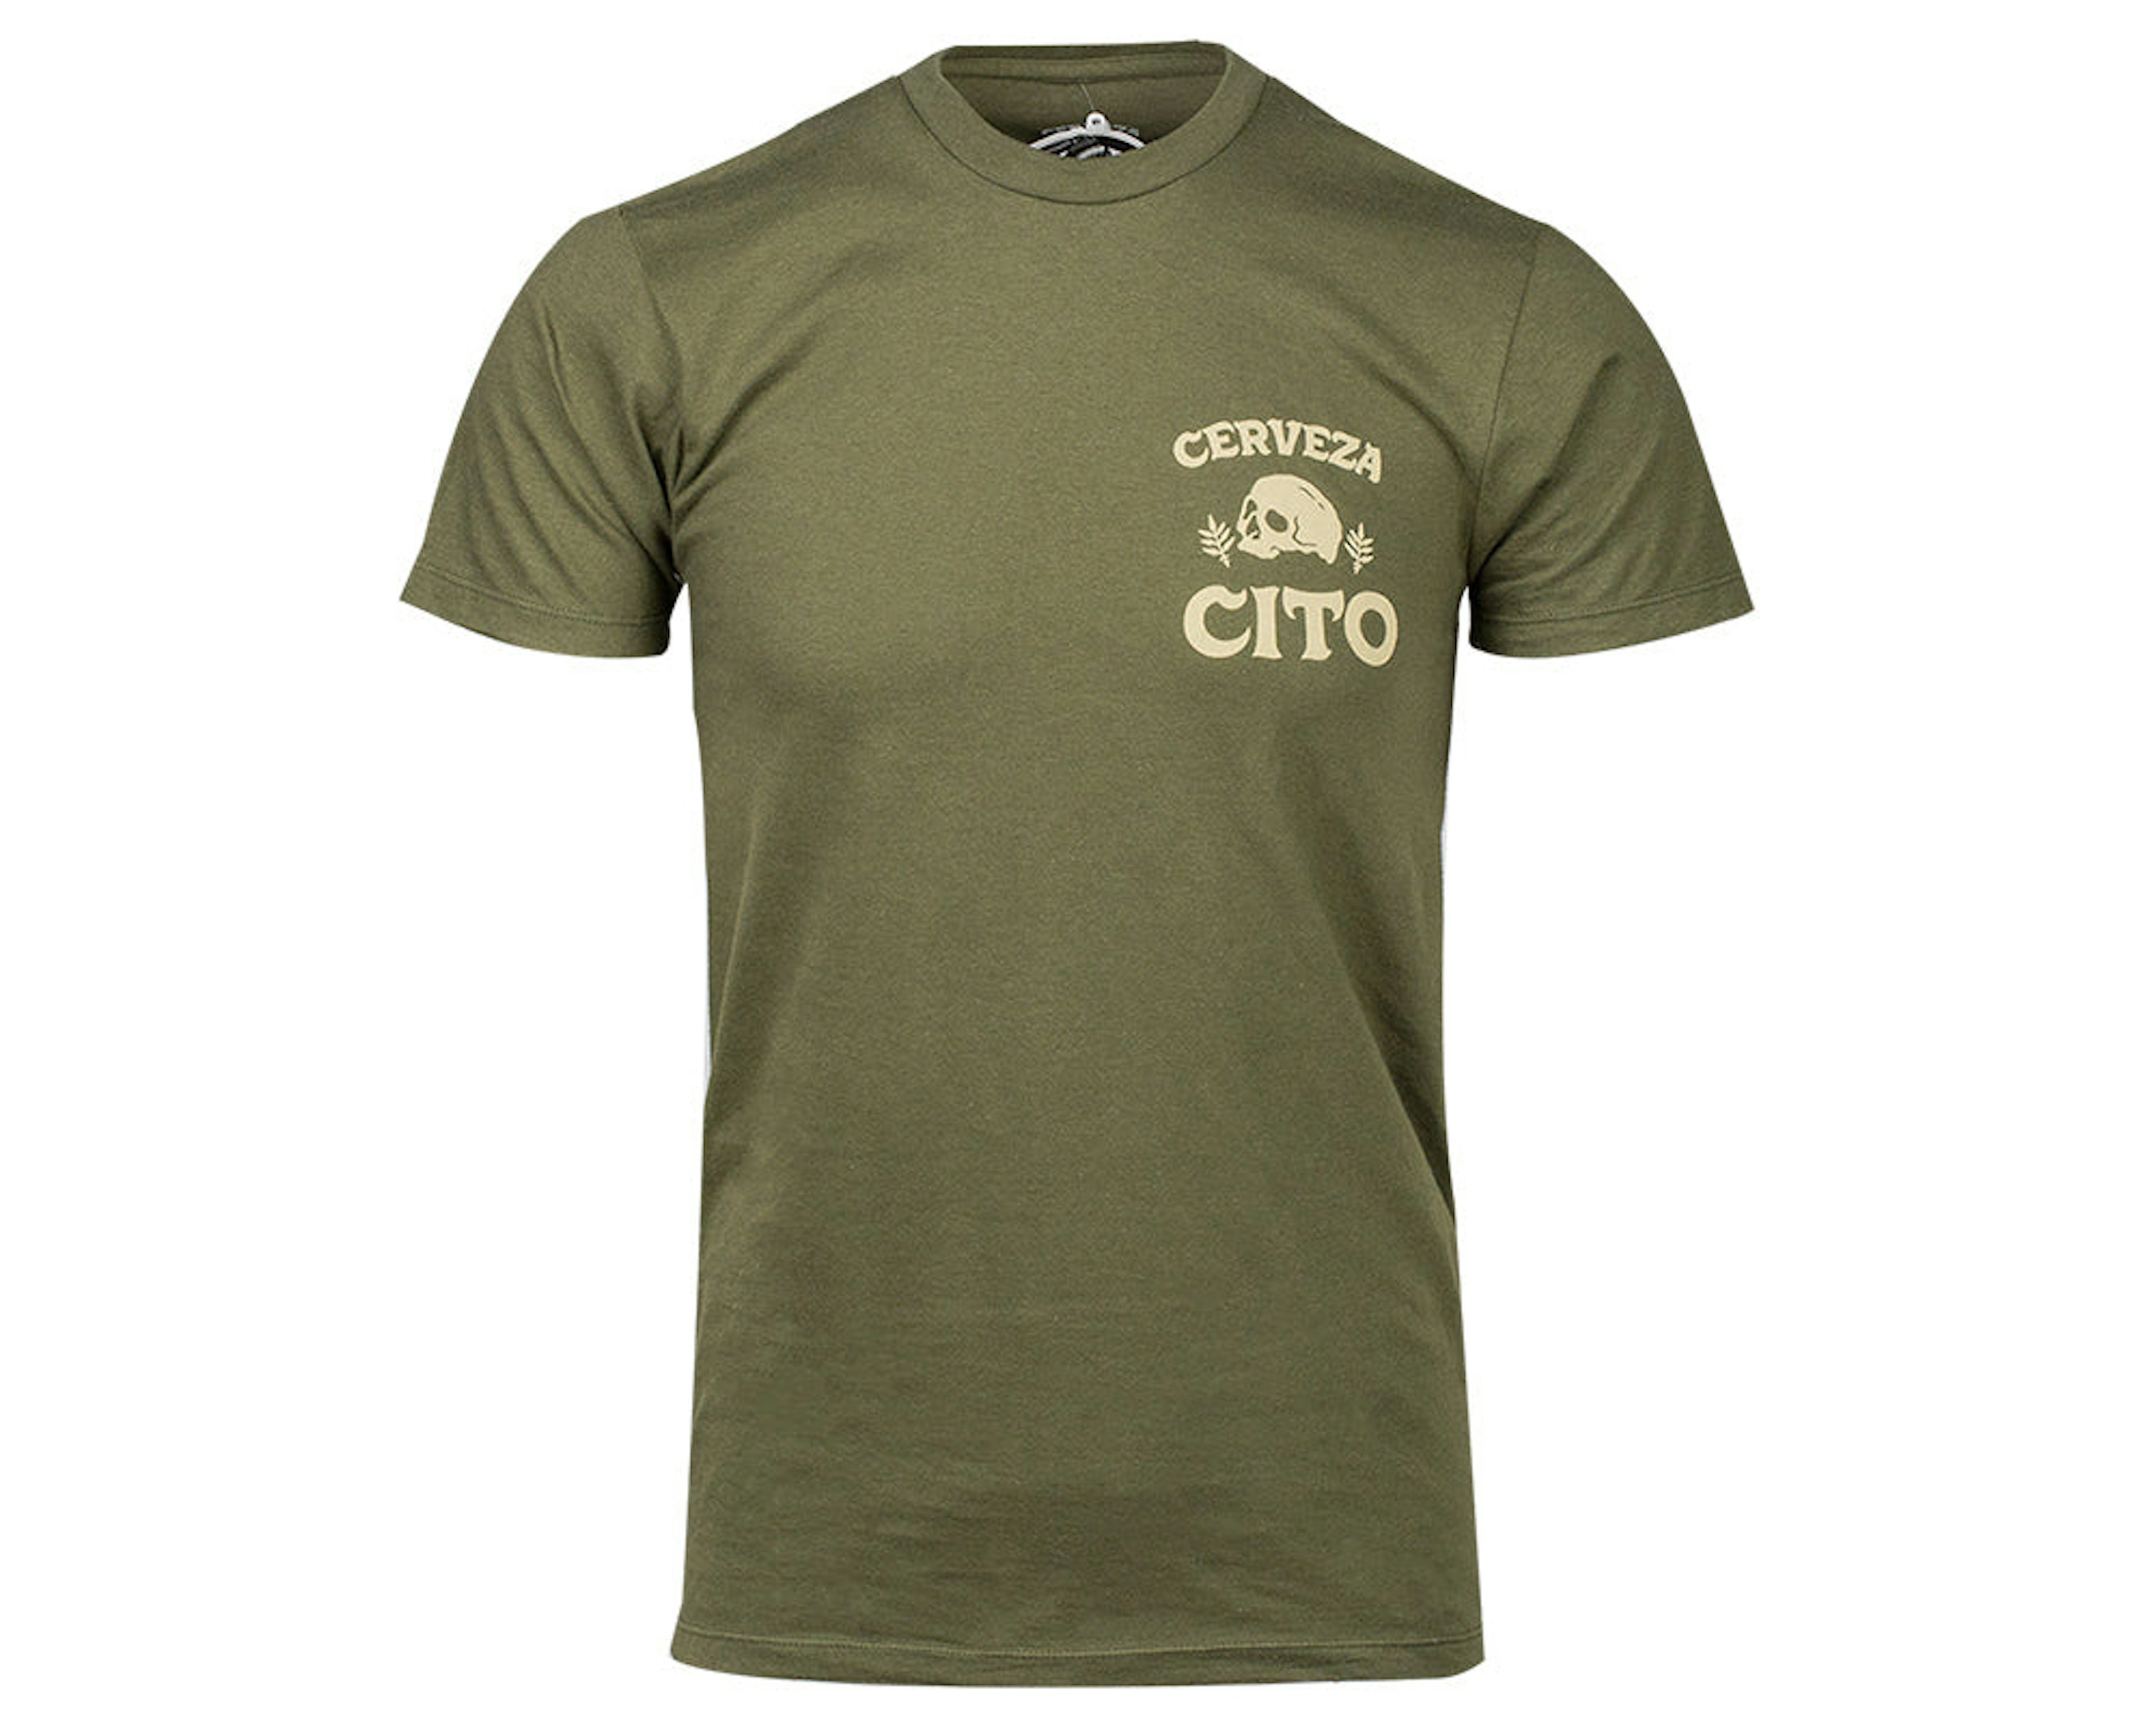 Cerveza Cito Tee - Military Green Front